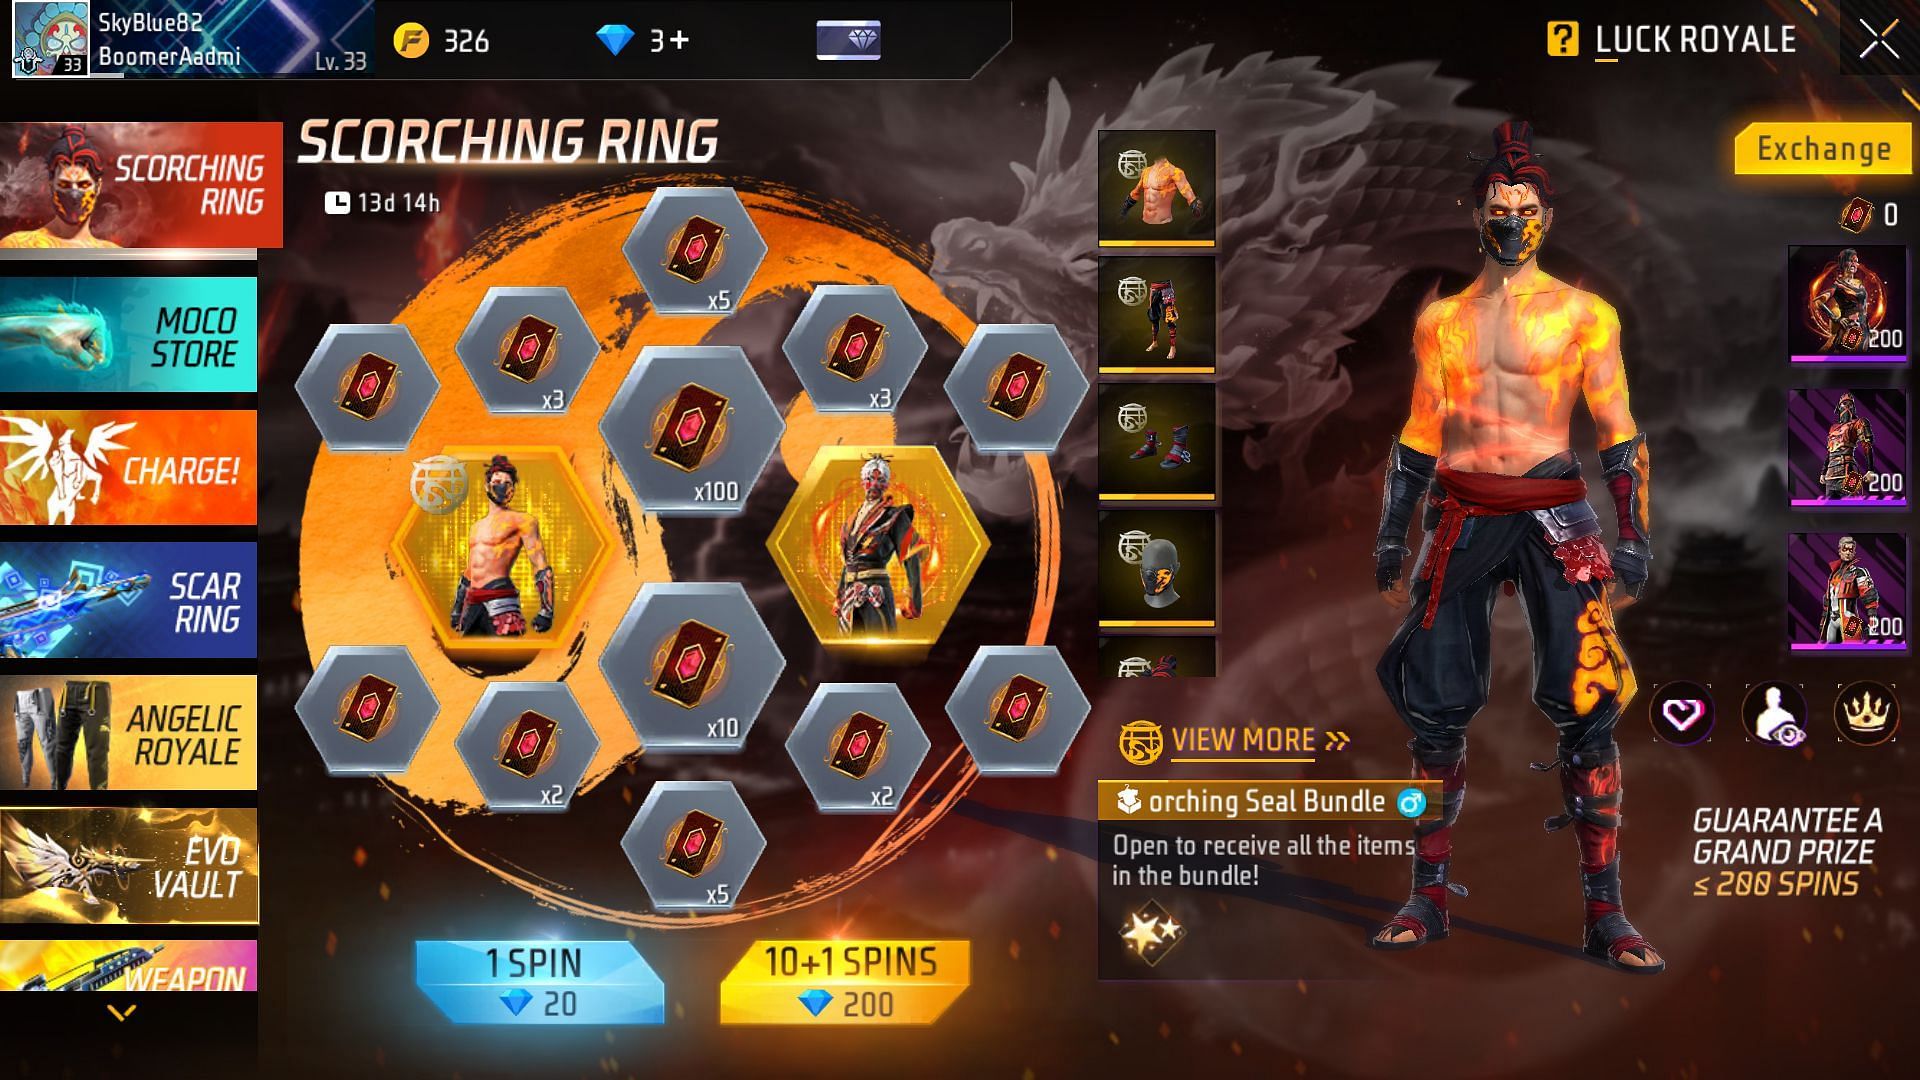 Players are guaranteed to get a grand prize within 200 spins (Image via Garena)